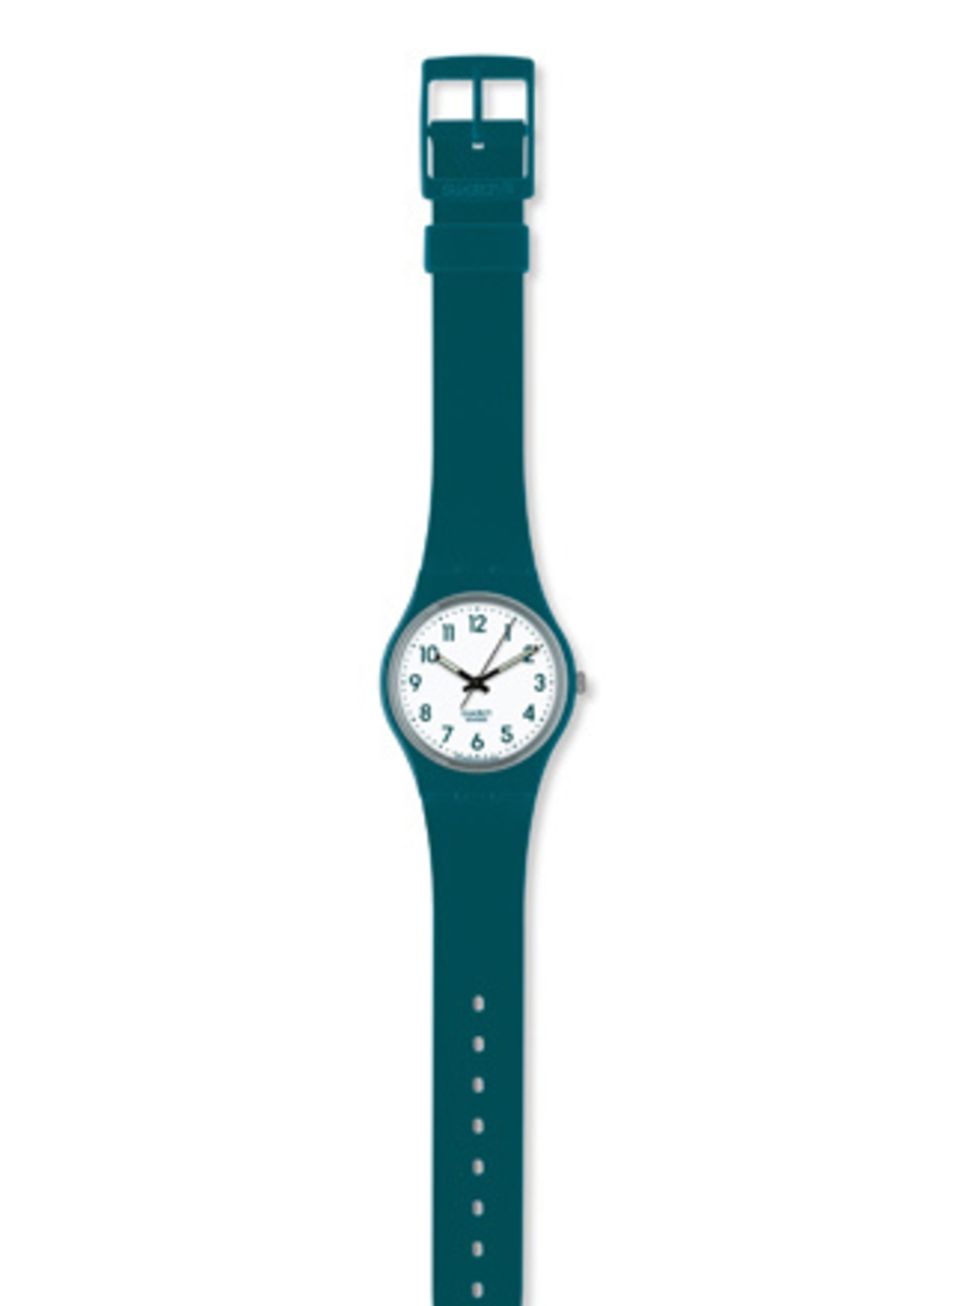 <p>These new Colour Code watches come in every shade imaginable so you can always match one to your outfit (that explains the name then!)</p><p>Watch, £28.50 by <a href="http://eu-shop.swatch.com/eshop/uk/en/colour_codes/matt.aspx">Swatch</a></p>